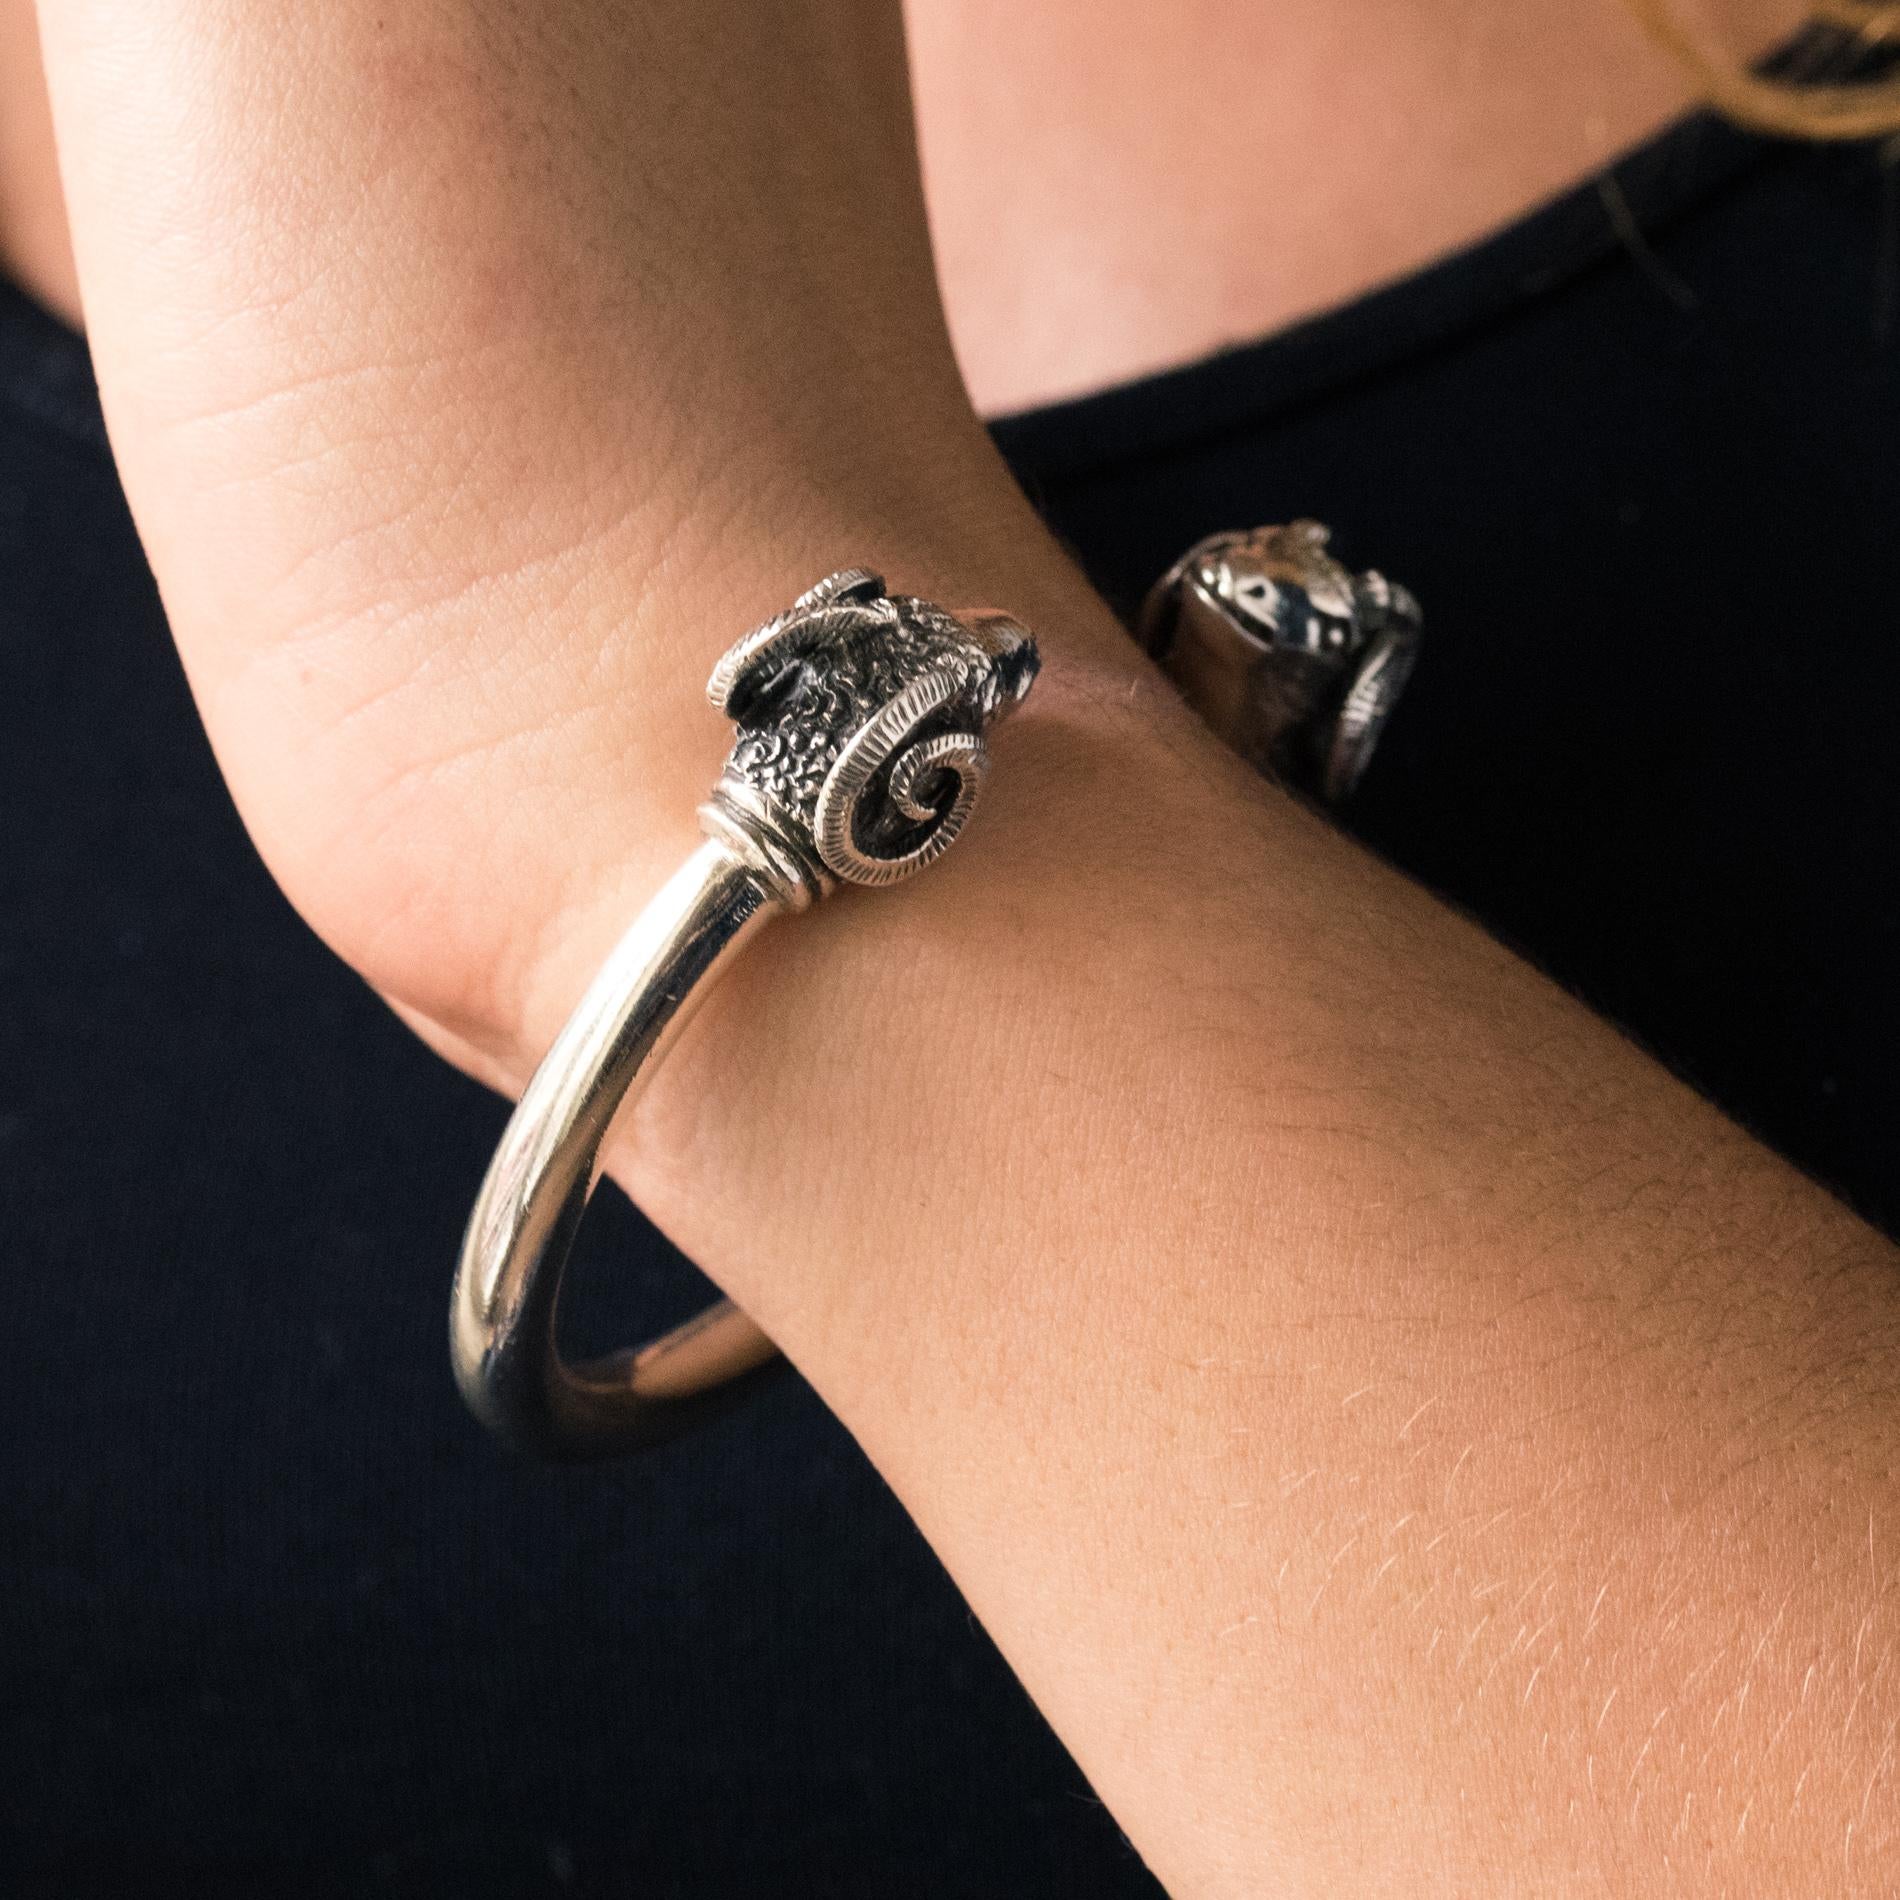 Bracelet in 925 thousandths silver, crab hallmark.
Massive, rigid and open, this magnificent vintage bracelet ends on the top with two rams heads, facing each other.
Inner circumference: about 14 cm, aperture: about 2.5 cm, wire thickness: 5.5 mm,